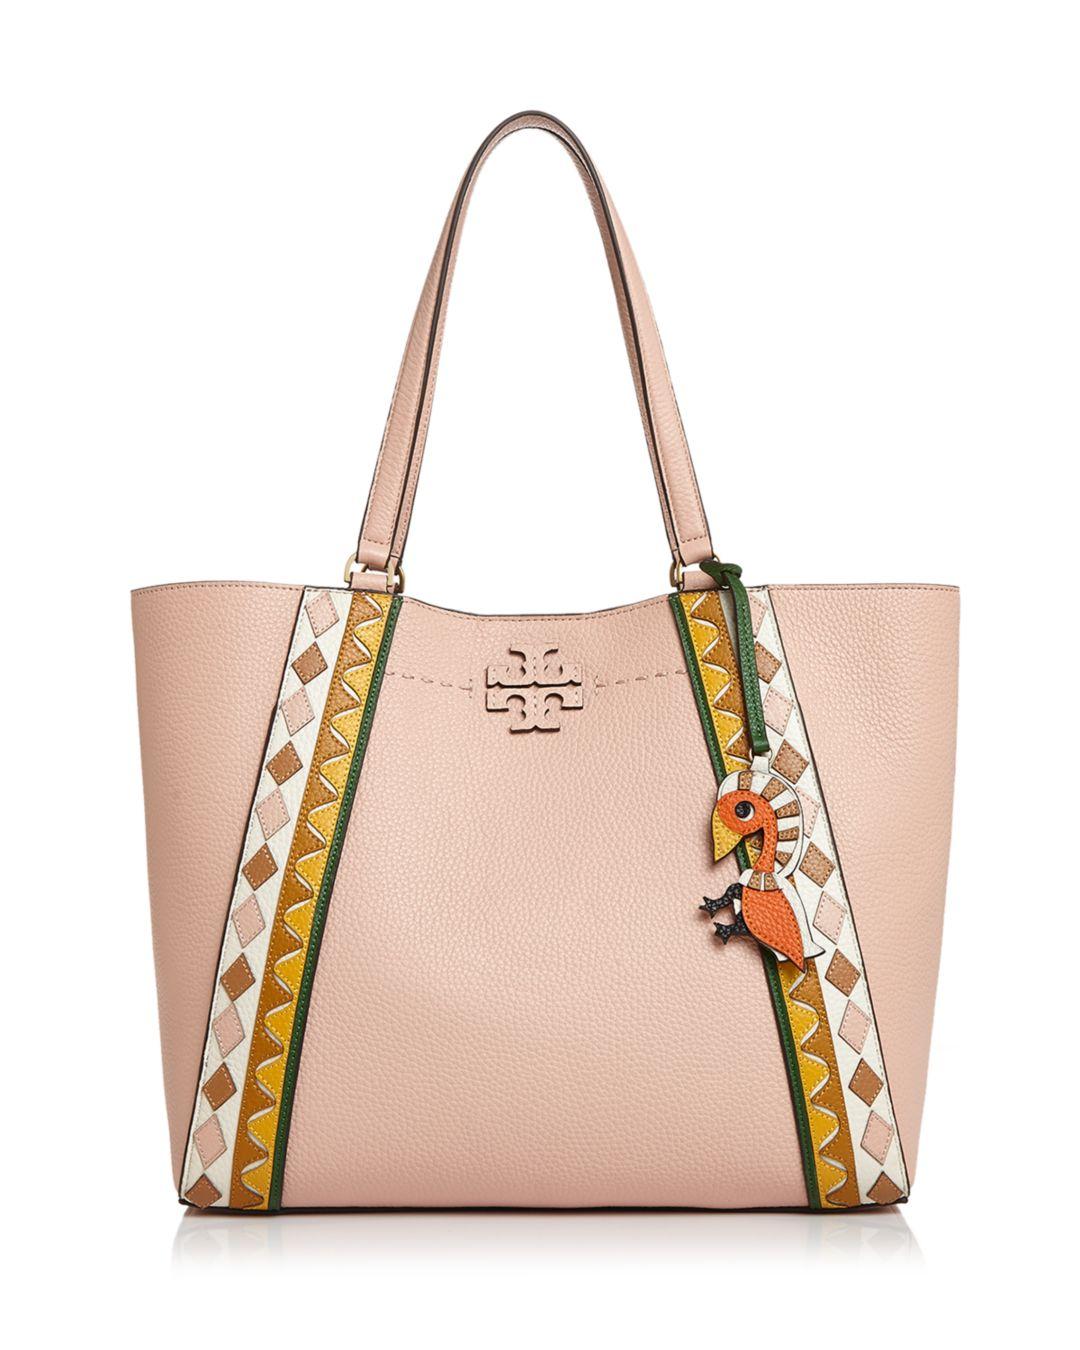 Tory Burch Leather Mcgraw Patchwork Carryall in Pink - Lyst